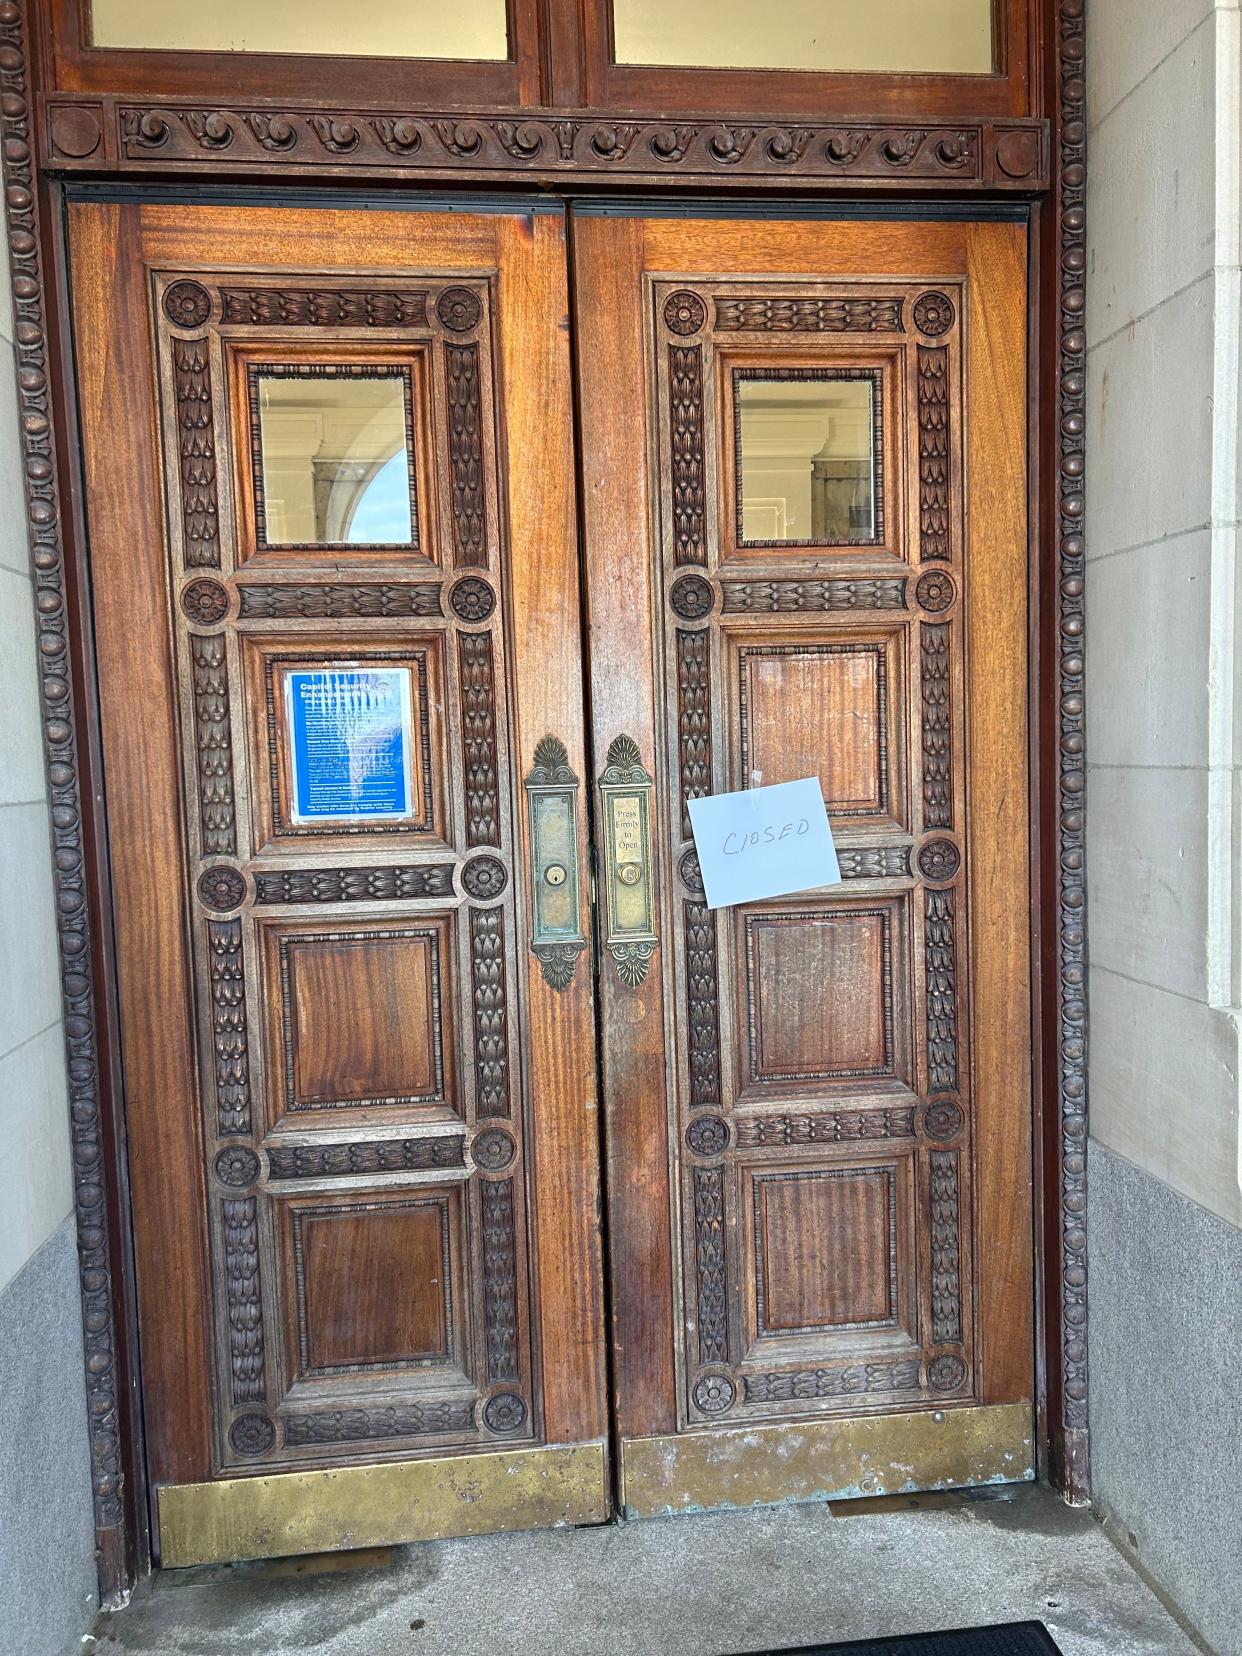 The doors of the Kentucky Capitol were closed Wednesday morning due to a bomb threat.